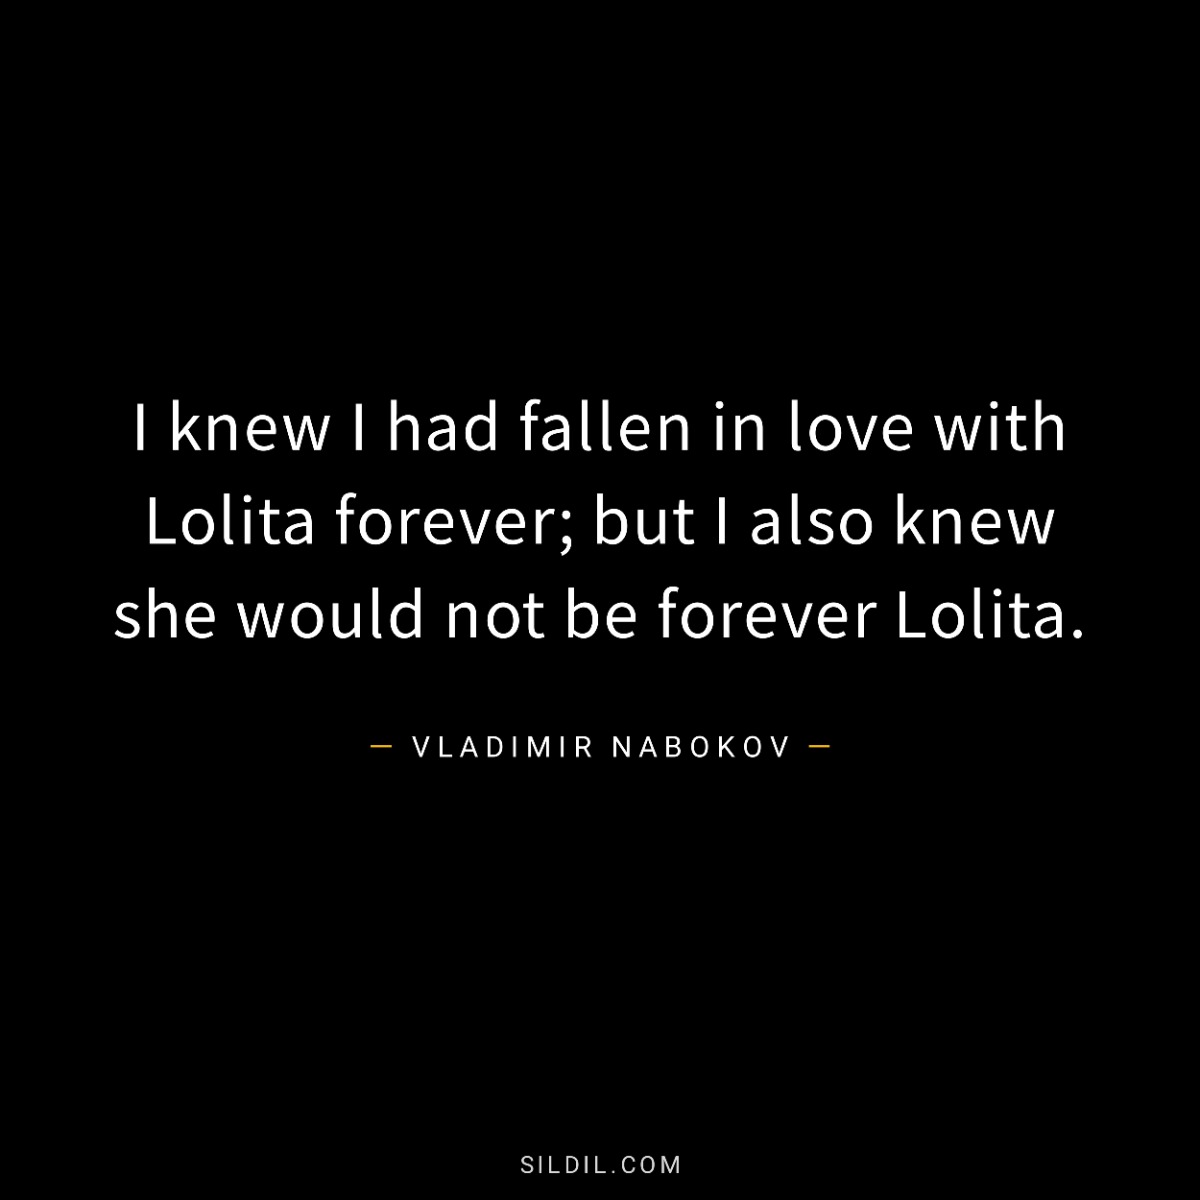 I knew I had fallen in love with Lolita forever; but I also knew she would not be forever Lolita.